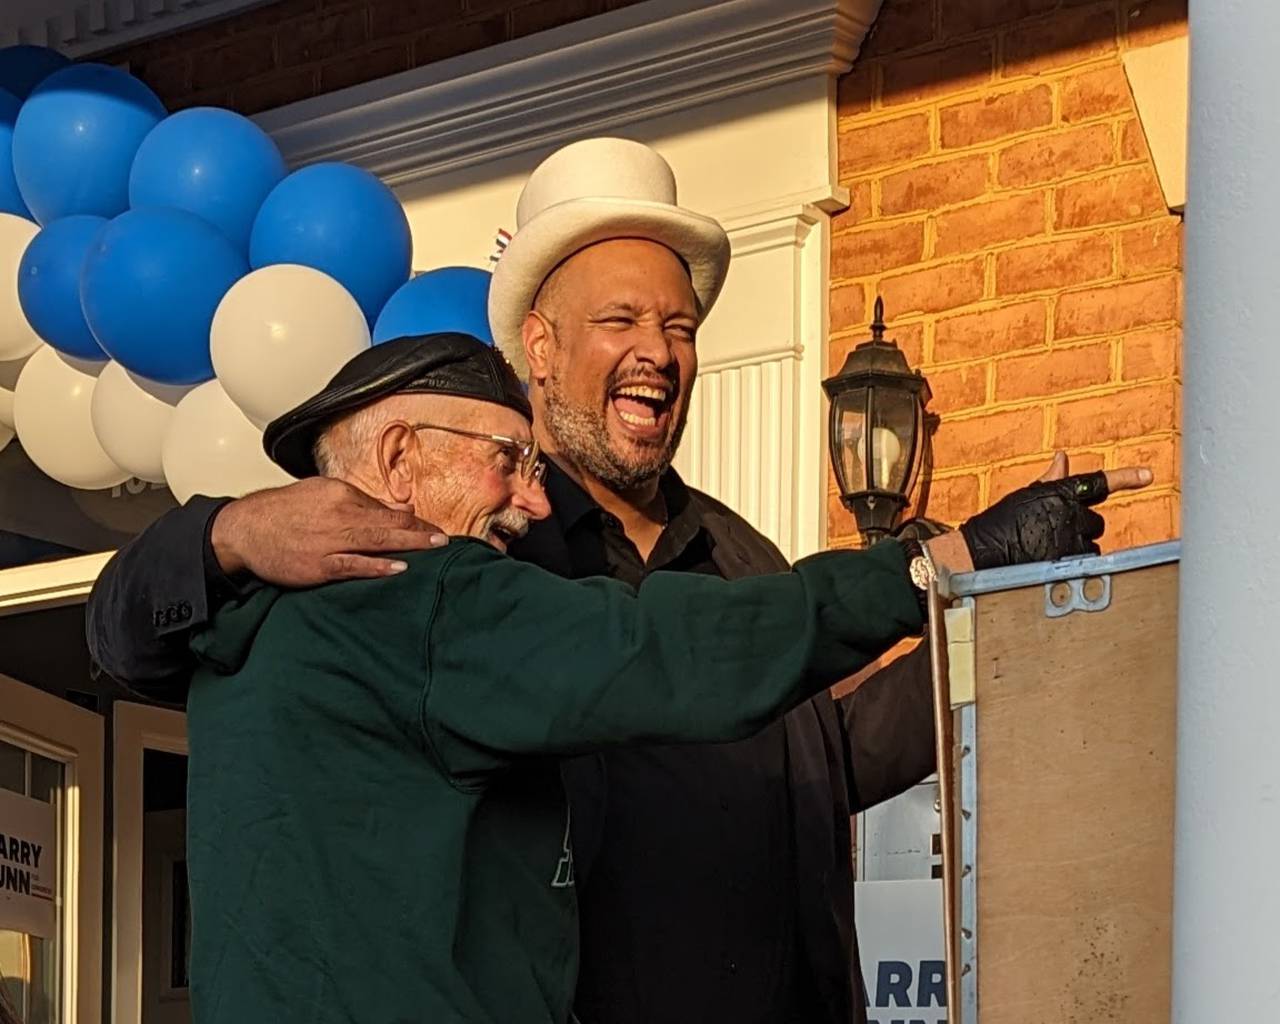 Harry Dunn, a candidate for Congress in the 3rd District, dons a silly hat and laughs with a supporter at the opening of his campaign headquarters in Ellicott City.